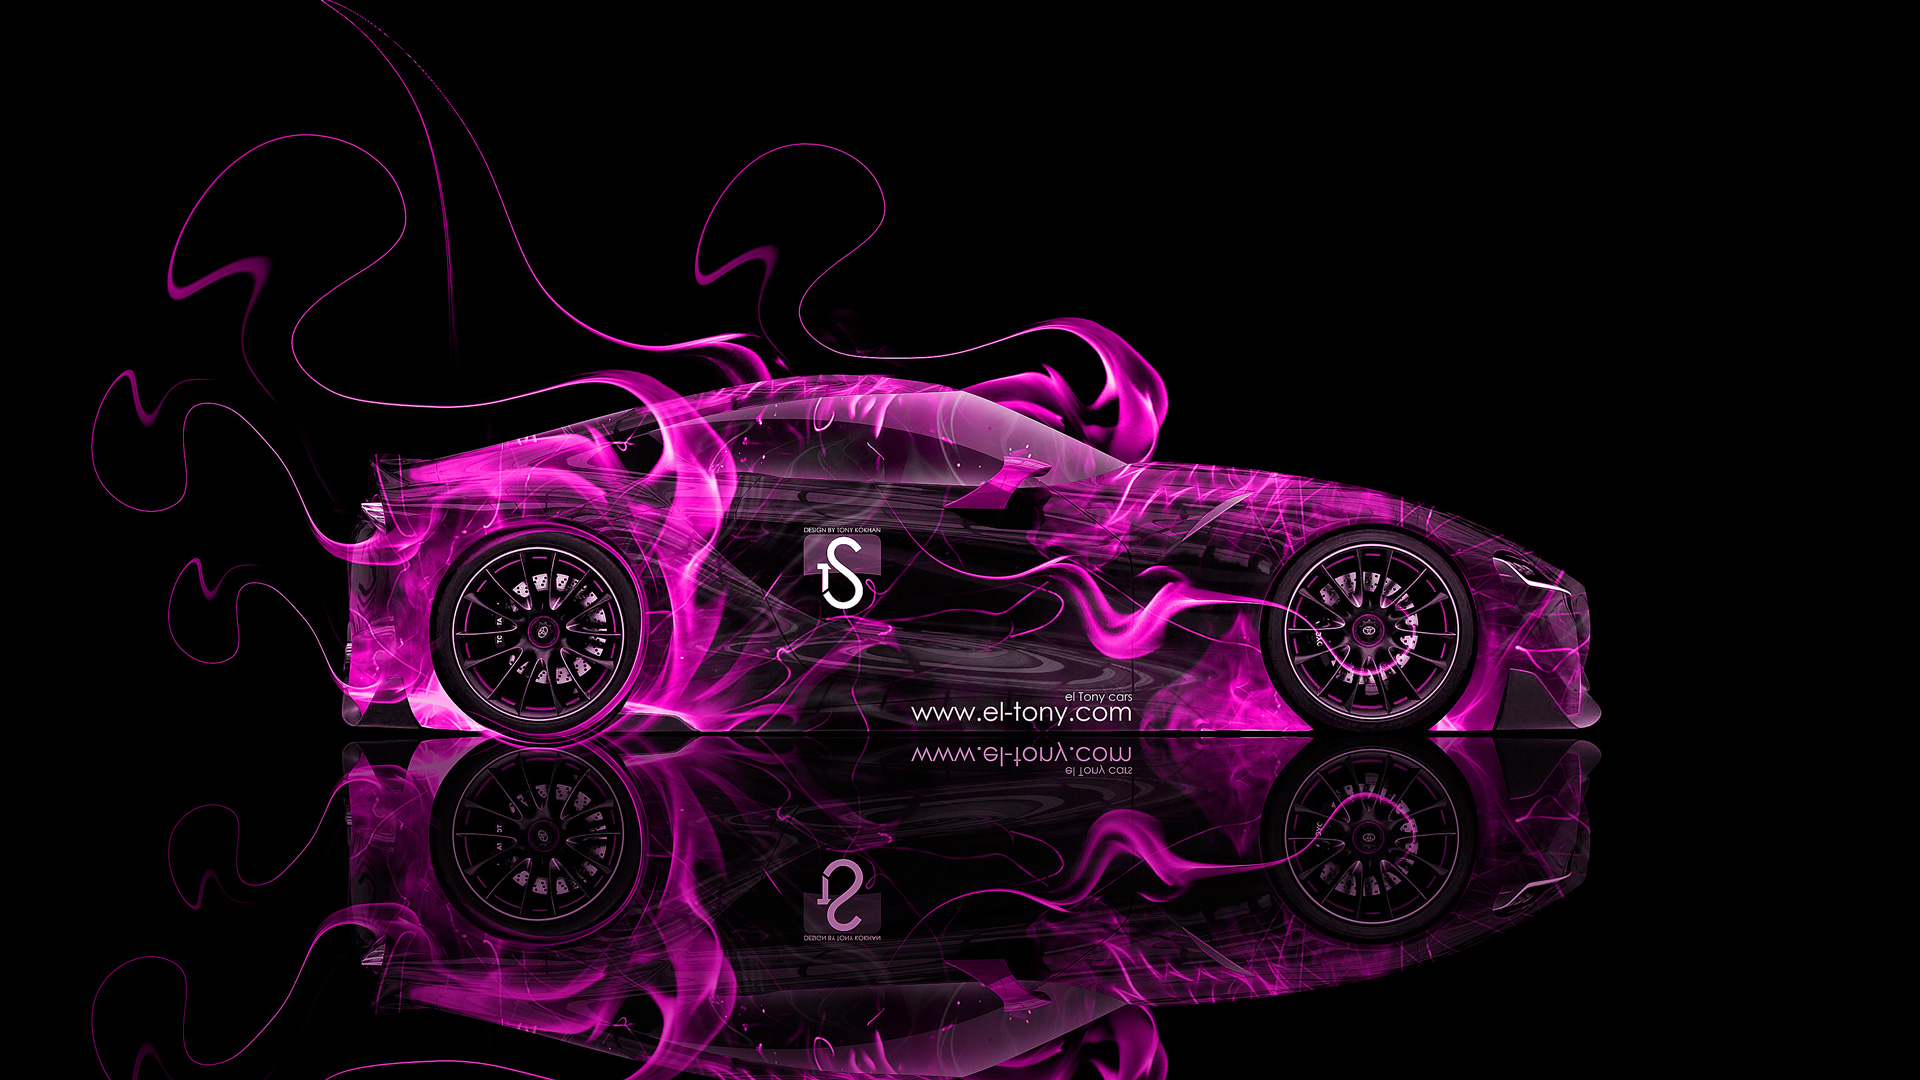 Toyota-FT-1-Pink-Fire-Abstract-Car-2014-HD-Wallpapers-design-by-Tony-Kokhan-www.el-tony.com_.jpg